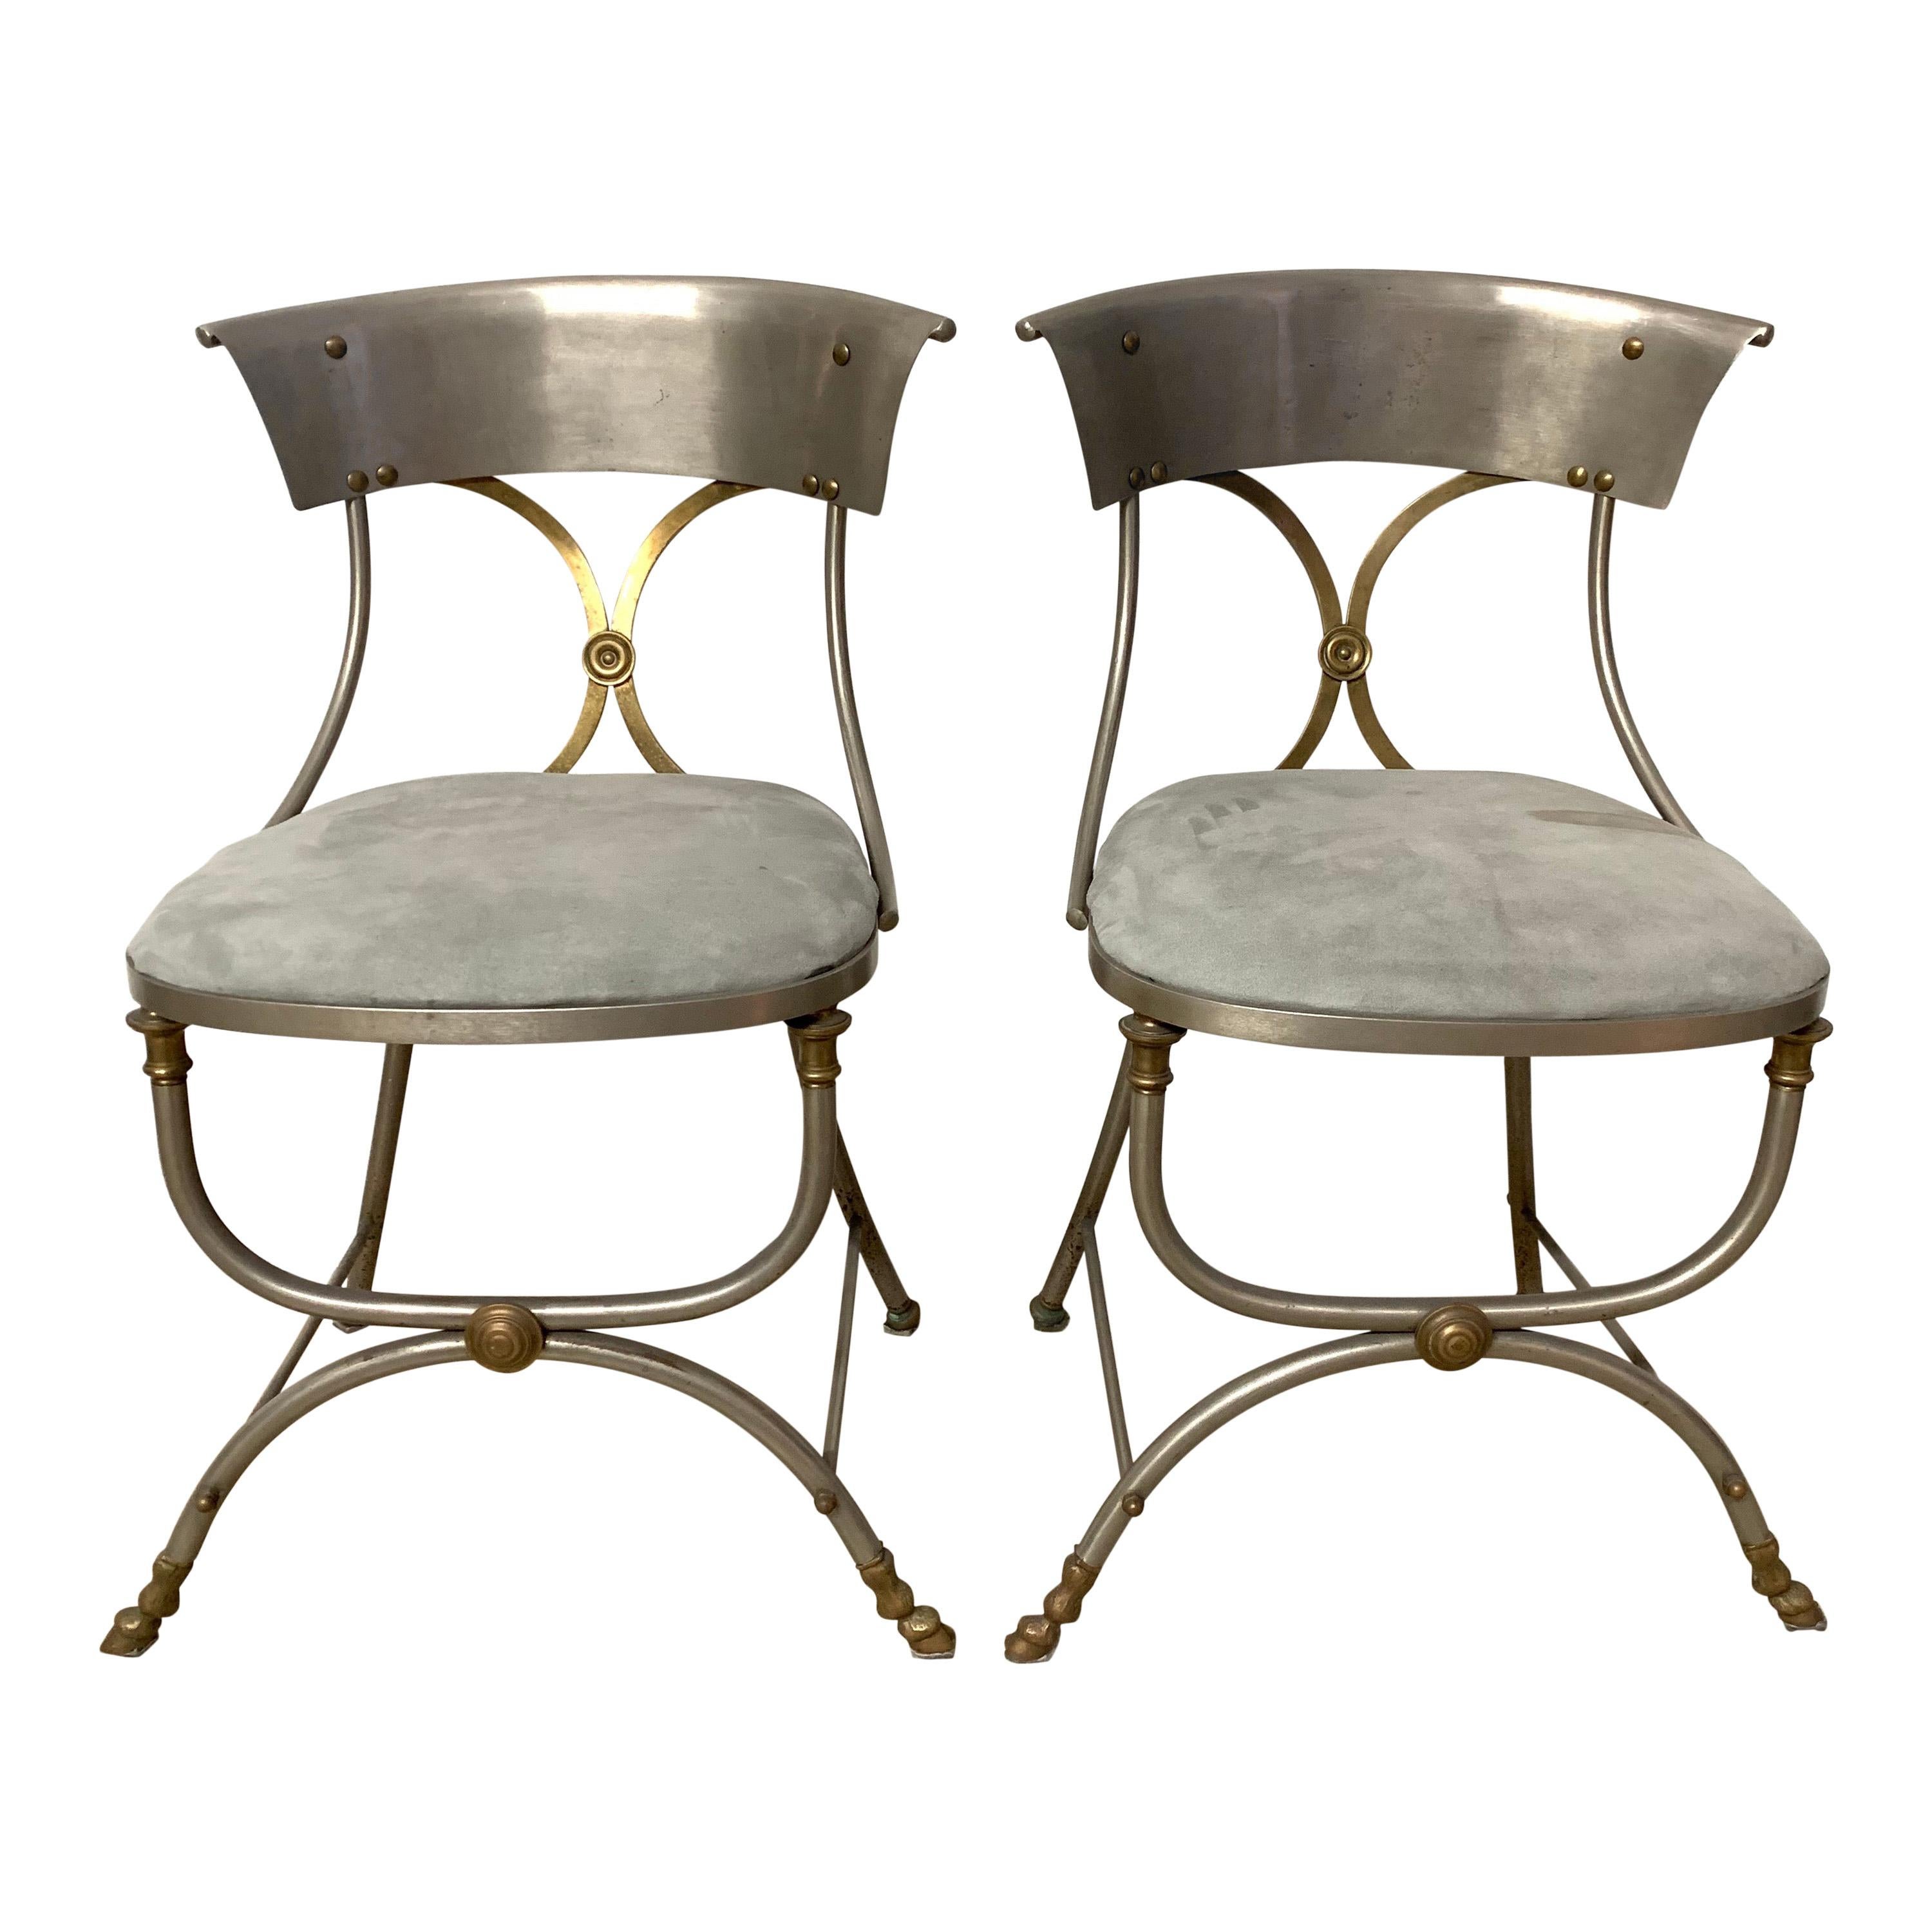 Rare Pair of Maison Jansen Steel and Brass Bronze Directoire Dining Side Chairs